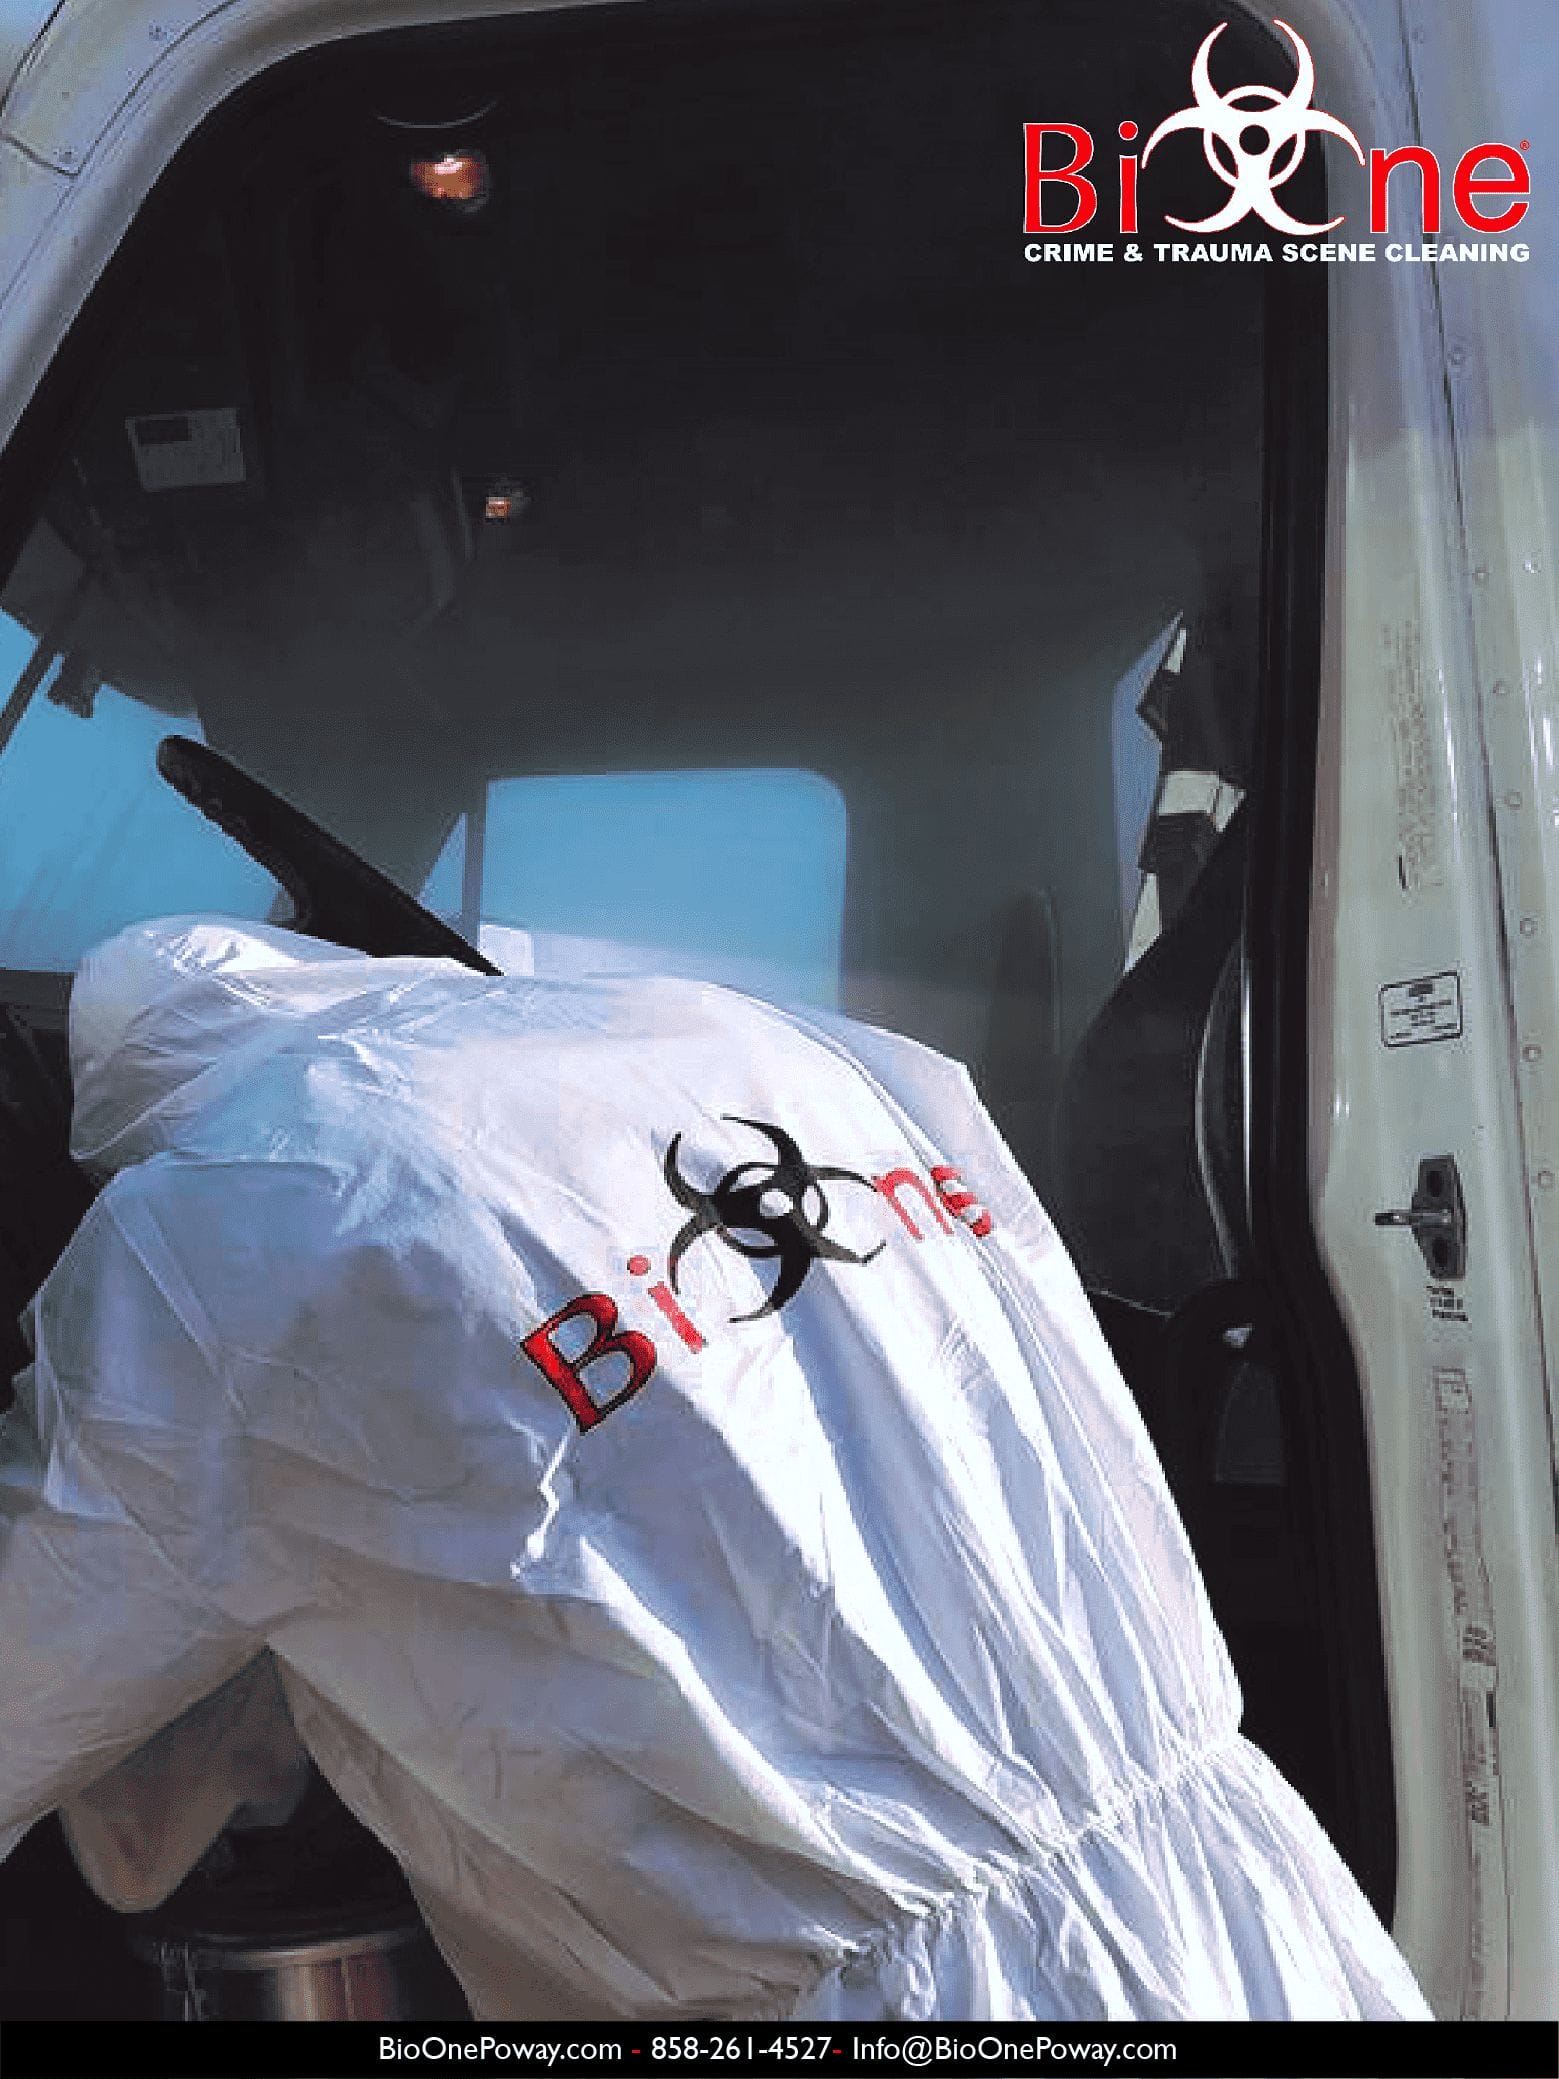 Image shows Bio-One technician disinfecting an emergency vehicle (ambulance).